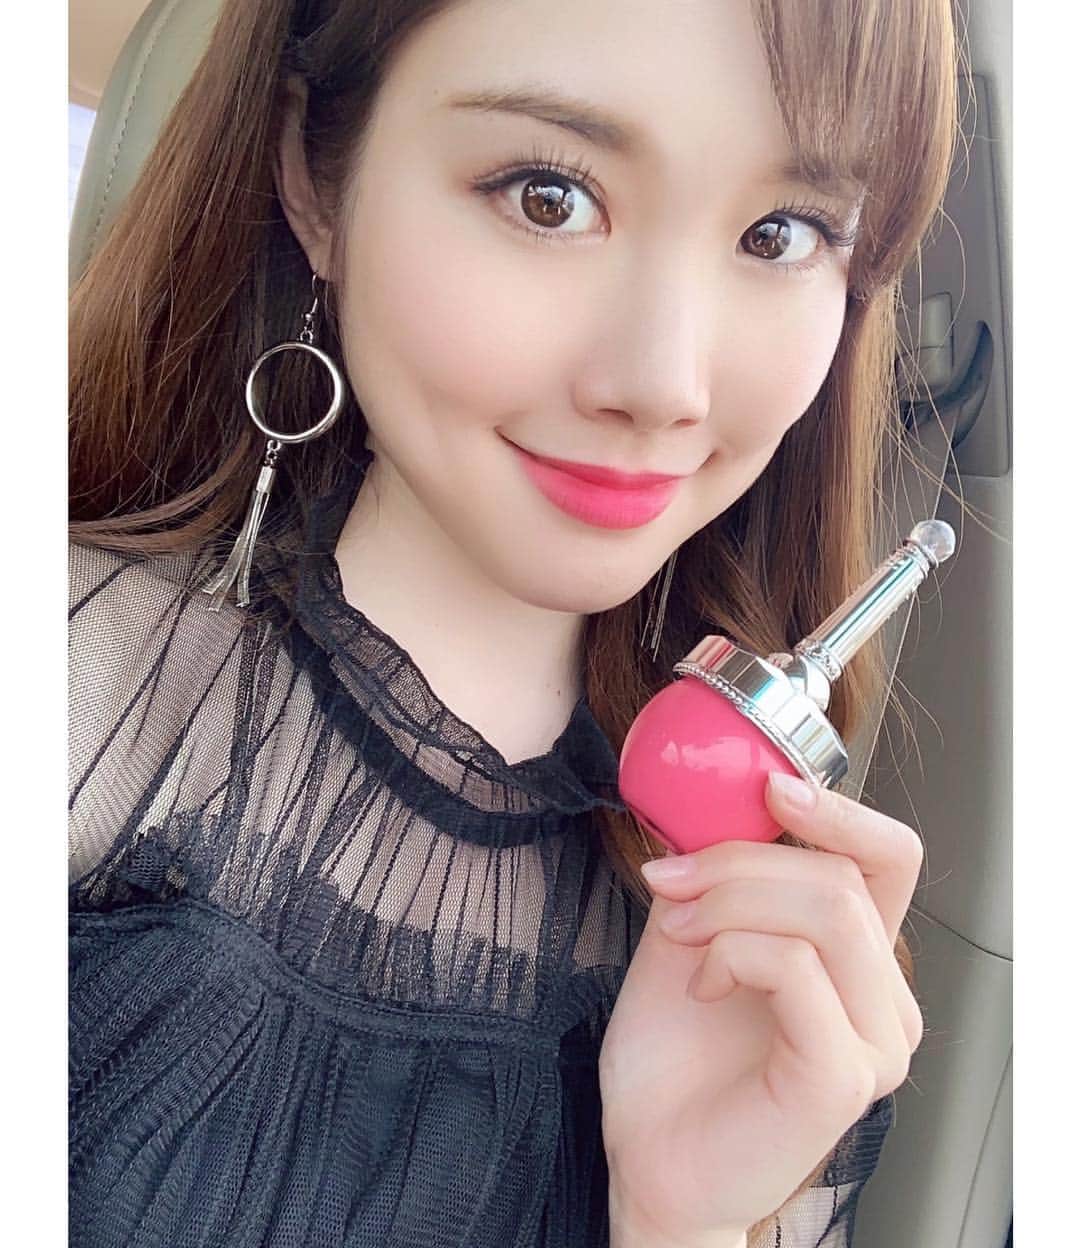 メロディー・モリタさんのインスタグラム写真 - (メロディー・モリタInstagram)「My look today with @jillstuartbeautyus🎀💄💖 I especially adore the Loose Blush which comes in the cutest packaging with a fluffy applicator! It's very quick & useful to create that "blushing from within" look☺️✨ For my eyes, I used the Modeling Lucent Eyes 02 palette from the "My Black Dress" collection which I've been loving since it came out in the Fall. It has been my go-to palette (brought it with me for all my recent business trips!) and it's the perfect reddish brown for my skin tone. I topped it all off with an elegant bright pink rouge that went perfectly with my LBD, just like its name.❤️ I've always thought of Jill Stuart as a super girly brand, but I love that they release elegant, chic collections as well! can’t wait to explore new colors and beauty trends as we finally approach the Spring!💐✨ * 今日のメイクは、大好きなジル・シチュアートのコスメで！😊 特にこのぽんぽんチーク（ルースブラッシュ 07番）はパッケージが可愛いだけでなく、とても使いやすくてお気に入り♪ ぽわんと内側から滲み出るような血色感をプラスしてくれます。 目元は、去年の秋頃から愛用している「My Black Dress」コレクションから私の肌トーンに合う赤みブラウンのパレットで仕上げ、ブラックドレスに映えるルージュと合わせました💄 ジルスチュアートはキュートなパッケージの印象が強かったのですが、大人っぽいシックなコレクションも素敵✨ これから春に向けて、色々なカラーメイクを楽しみたいなぁ☺️💖 #jillstuart #jillstuartbeauty #kose #pr #lotd #motd #ジルスチュアート」3月16日 12時29分 - melodeemorita